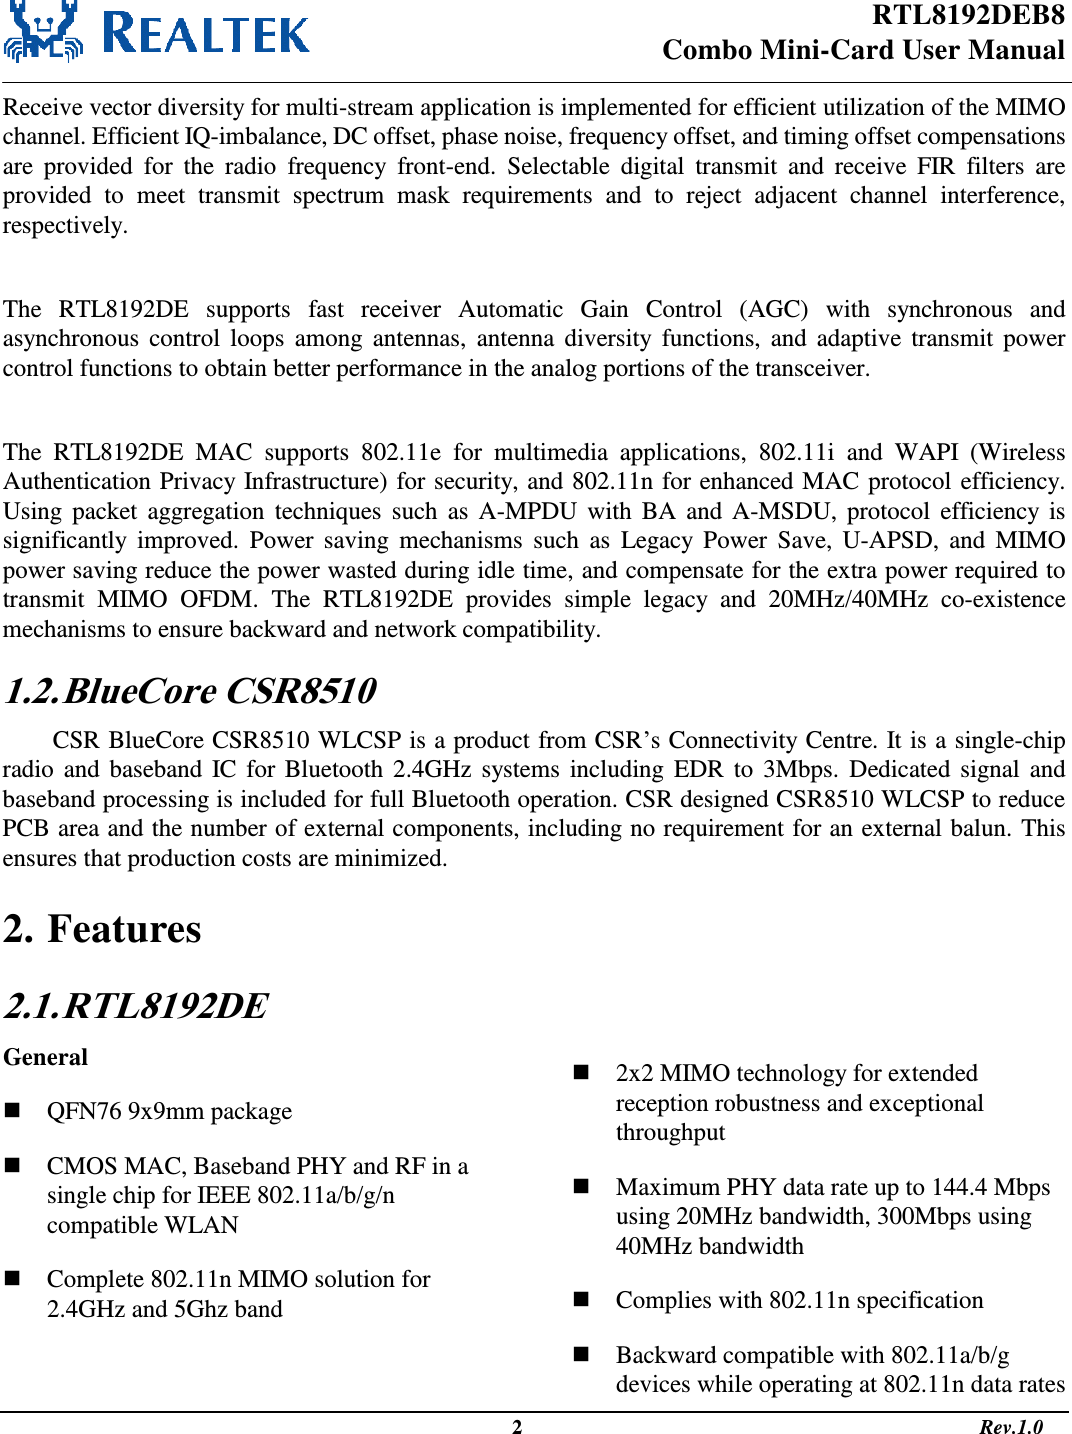 RTL8192DEB8 Combo Mini-Card User Manual                                                                                                   2                                                                                       Rev.1.0  Receive vector diversity for multi-stream application is implemented for efficient utilization of the MIMO channel. Efficient IQ-imbalance, DC offset, phase noise, frequency offset, and timing offset compensations are  provided  for  the  radio  frequency  front-end.  Selectable  digital  transmit  and  receive  FIR  filters  are provided  to  meet  transmit  spectrum  mask  requirements  and  to  reject  adjacent  channel  interference, respectively.  The  RTL8192DE  supports  fast  receiver  Automatic  Gain  Control  (AGC)  with  synchronous  and asynchronous  control  loops  among  antennas,  antenna diversity  functions,  and  adaptive  transmit  power control functions to obtain better performance in the analog portions of the transceiver.  The  RTL8192DE  MAC  supports  802.11e  for  multimedia  applications,  802.11i  and  WAPI  (Wireless Authentication Privacy Infrastructure) for security, and 802.11n for enhanced MAC protocol efficiency. Using packet  aggregation  techniques  such  as A-MPDU  with  BA  and  A-MSDU, protocol efficiency  is significantly  improved.  Power  saving  mechanisms  such  as  Legacy Power  Save,  U-APSD,  and  MIMO power saving reduce the power wasted during idle time, and compensate for the extra power required to transmit  MIMO  OFDM.  The  RTL8192DE  provides  simple  legacy  and  20MHz/40MHz  co-existence mechanisms to ensure backward and network compatibility. 1.2. BlueCore CSR8510 CSR BlueCore CSR8510 WLCSP is a product from CSR’s Connectivity Centre. It is a single-chip radio and baseband IC for Bluetooth 2.4GHz systems including EDR  to  3Mbps.  Dedicated signal and baseband processing is included for full Bluetooth operation. CSR designed CSR8510 WLCSP to reduce PCB area and the number of external components, including no requirement for an external balun. This ensures that production costs are minimized.   2. Features 2.1. RTL8192DE General  QFN76 9x9mm package  CMOS MAC, Baseband PHY and RF in a single chip for IEEE 802.11a/b/g/n compatible WLAN  Complete 802.11n MIMO solution for 2.4GHz and 5Ghz band  2x2 MIMO technology for extended reception robustness and exceptional throughput  Maximum PHY data rate up to 144.4 Mbps using 20MHz bandwidth, 300Mbps using 40MHz bandwidth  Complies with 802.11n specification  Backward compatible with 802.11a/b/g devices while operating at 802.11n data rates 